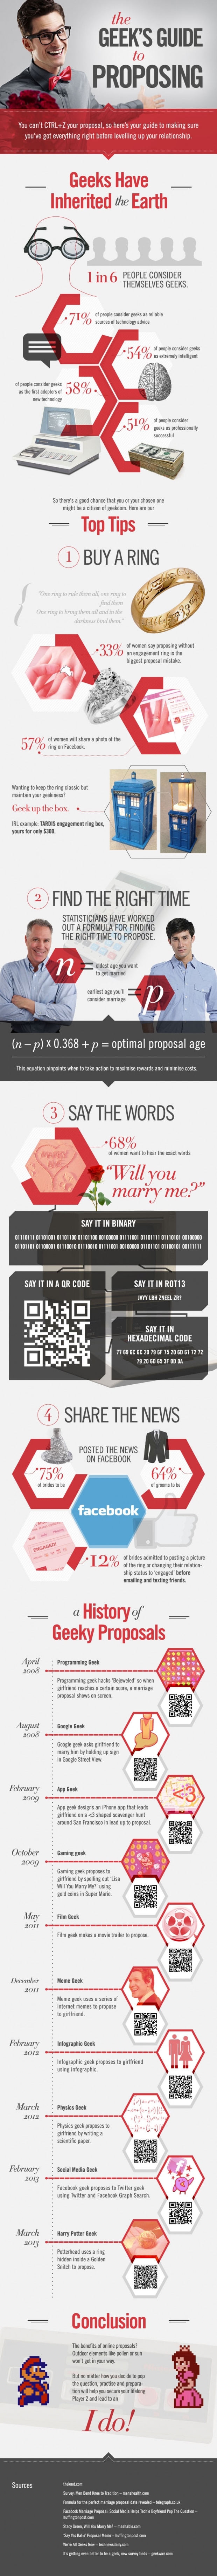 ultimate-geek-proposal-guide-infographic